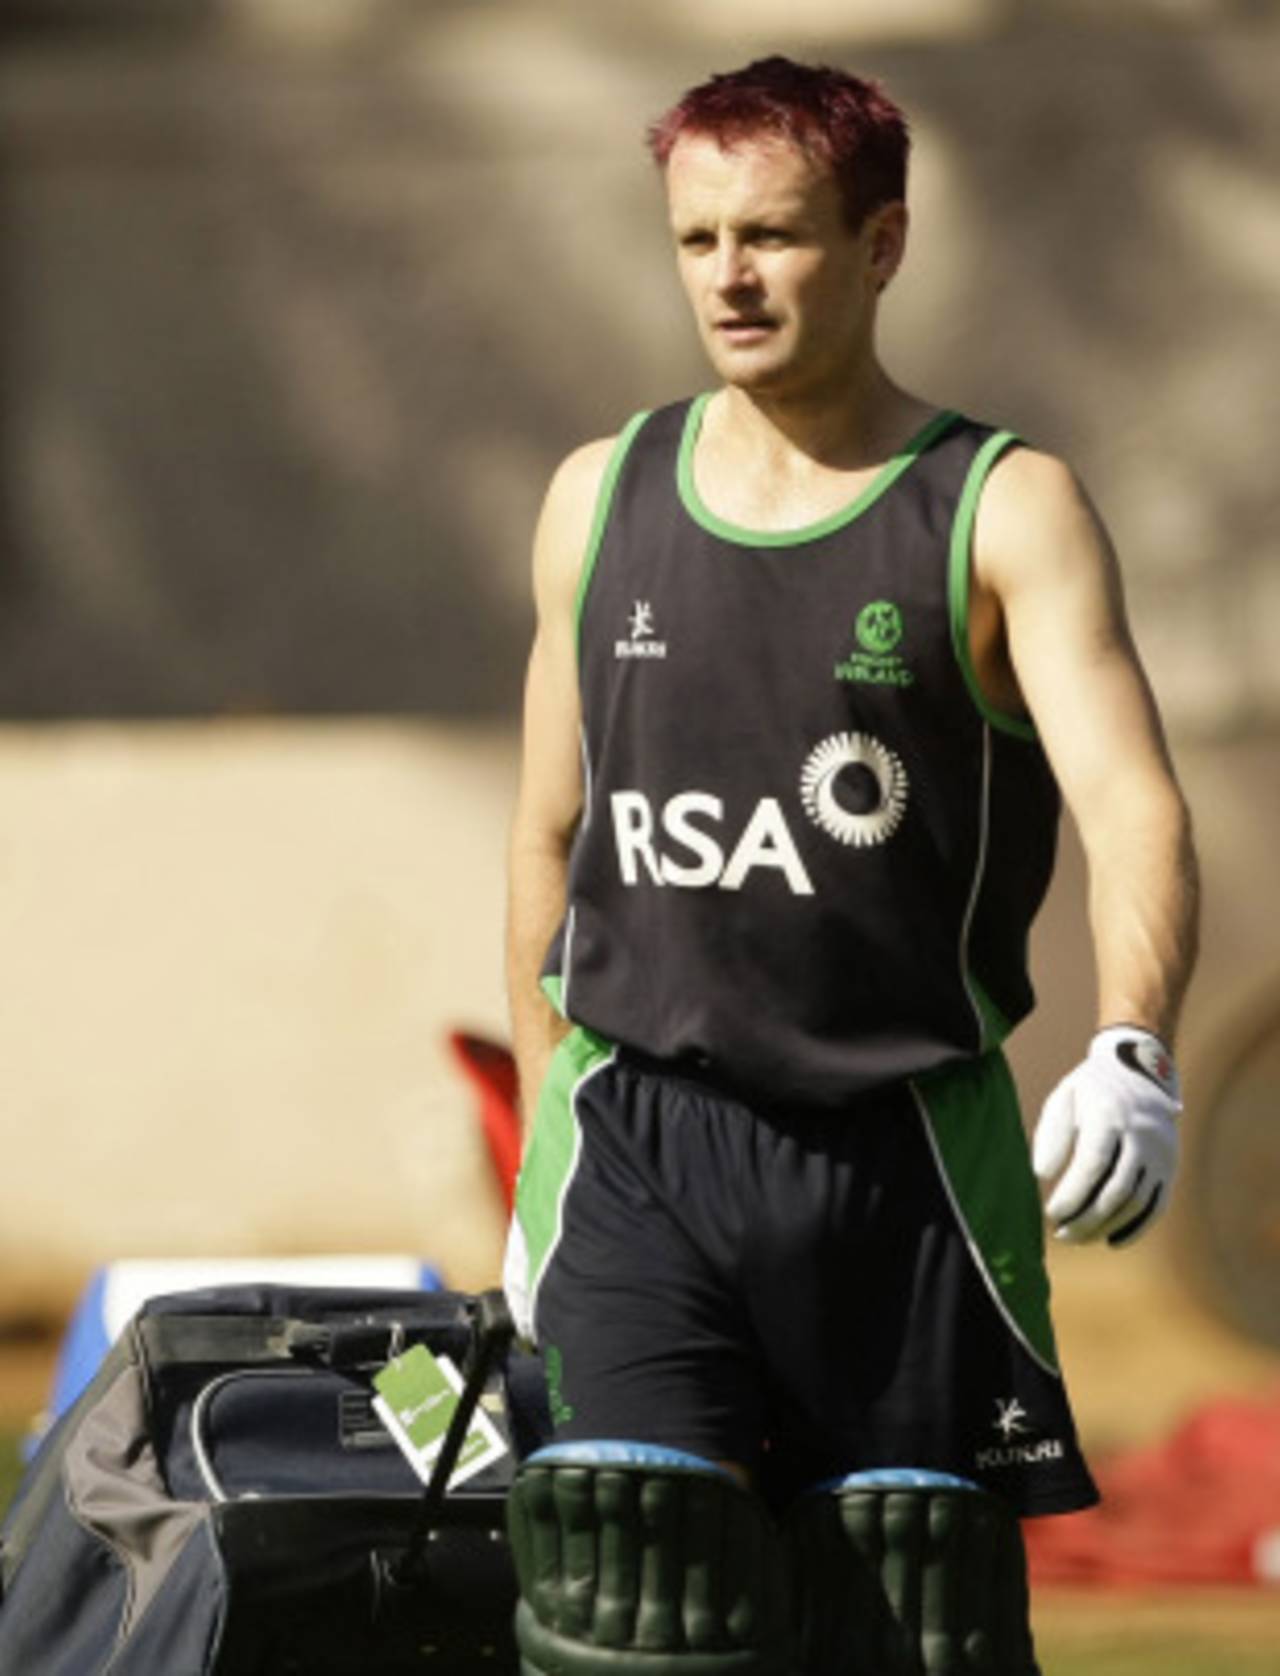 William Porterfield arrives for practice ahead of Ireland's World Cup match against India, Bangalore, March 5, 2011